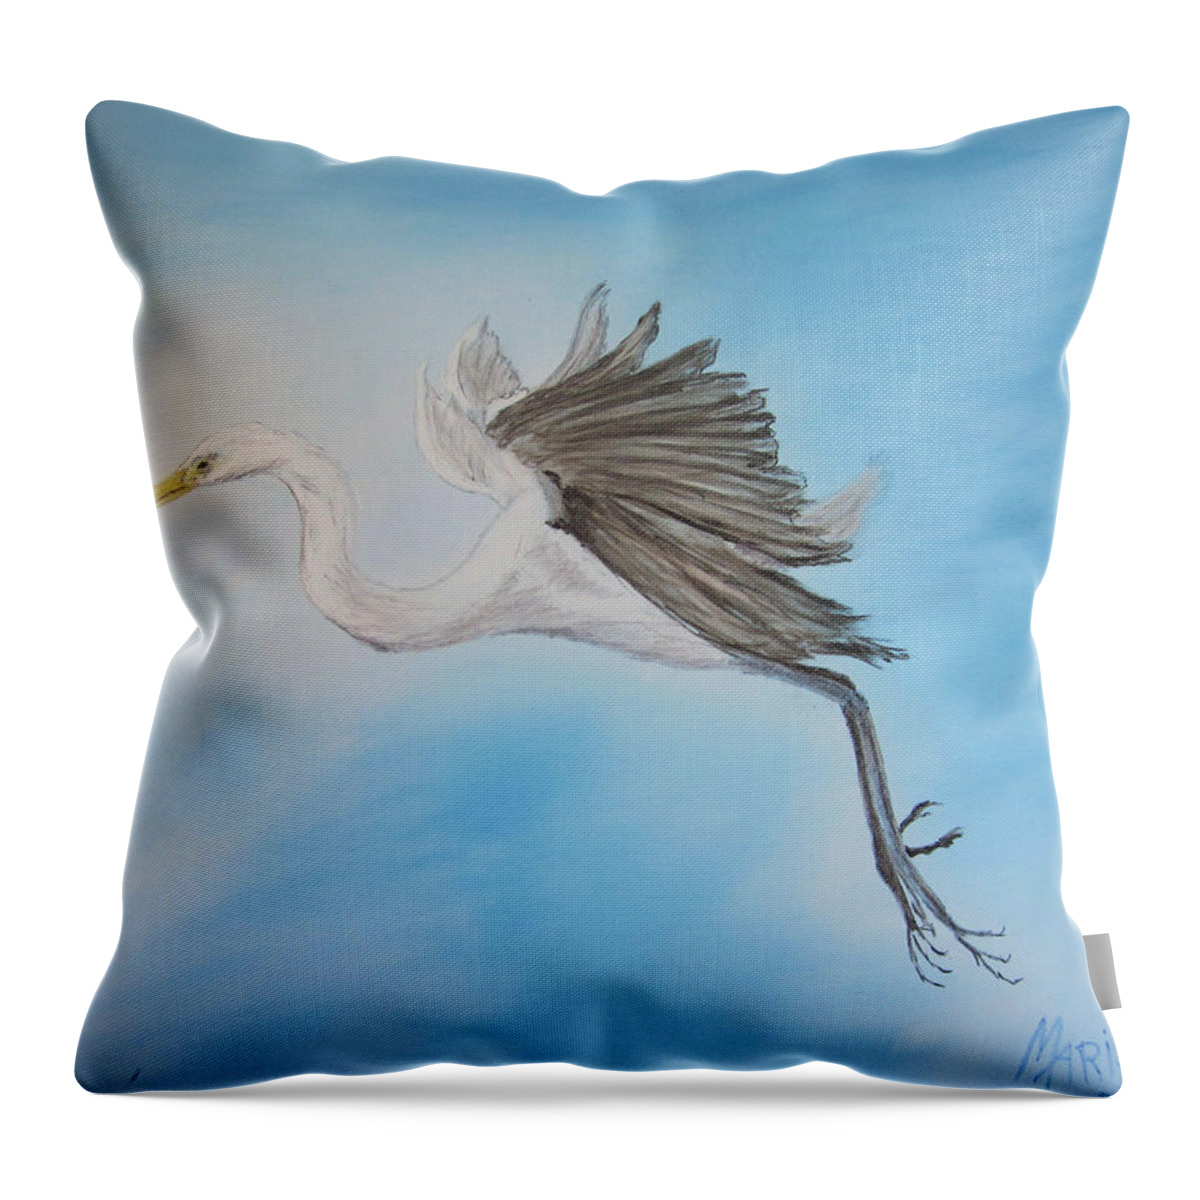 Birds Throw Pillow featuring the painting Alone by Maris Sherwood